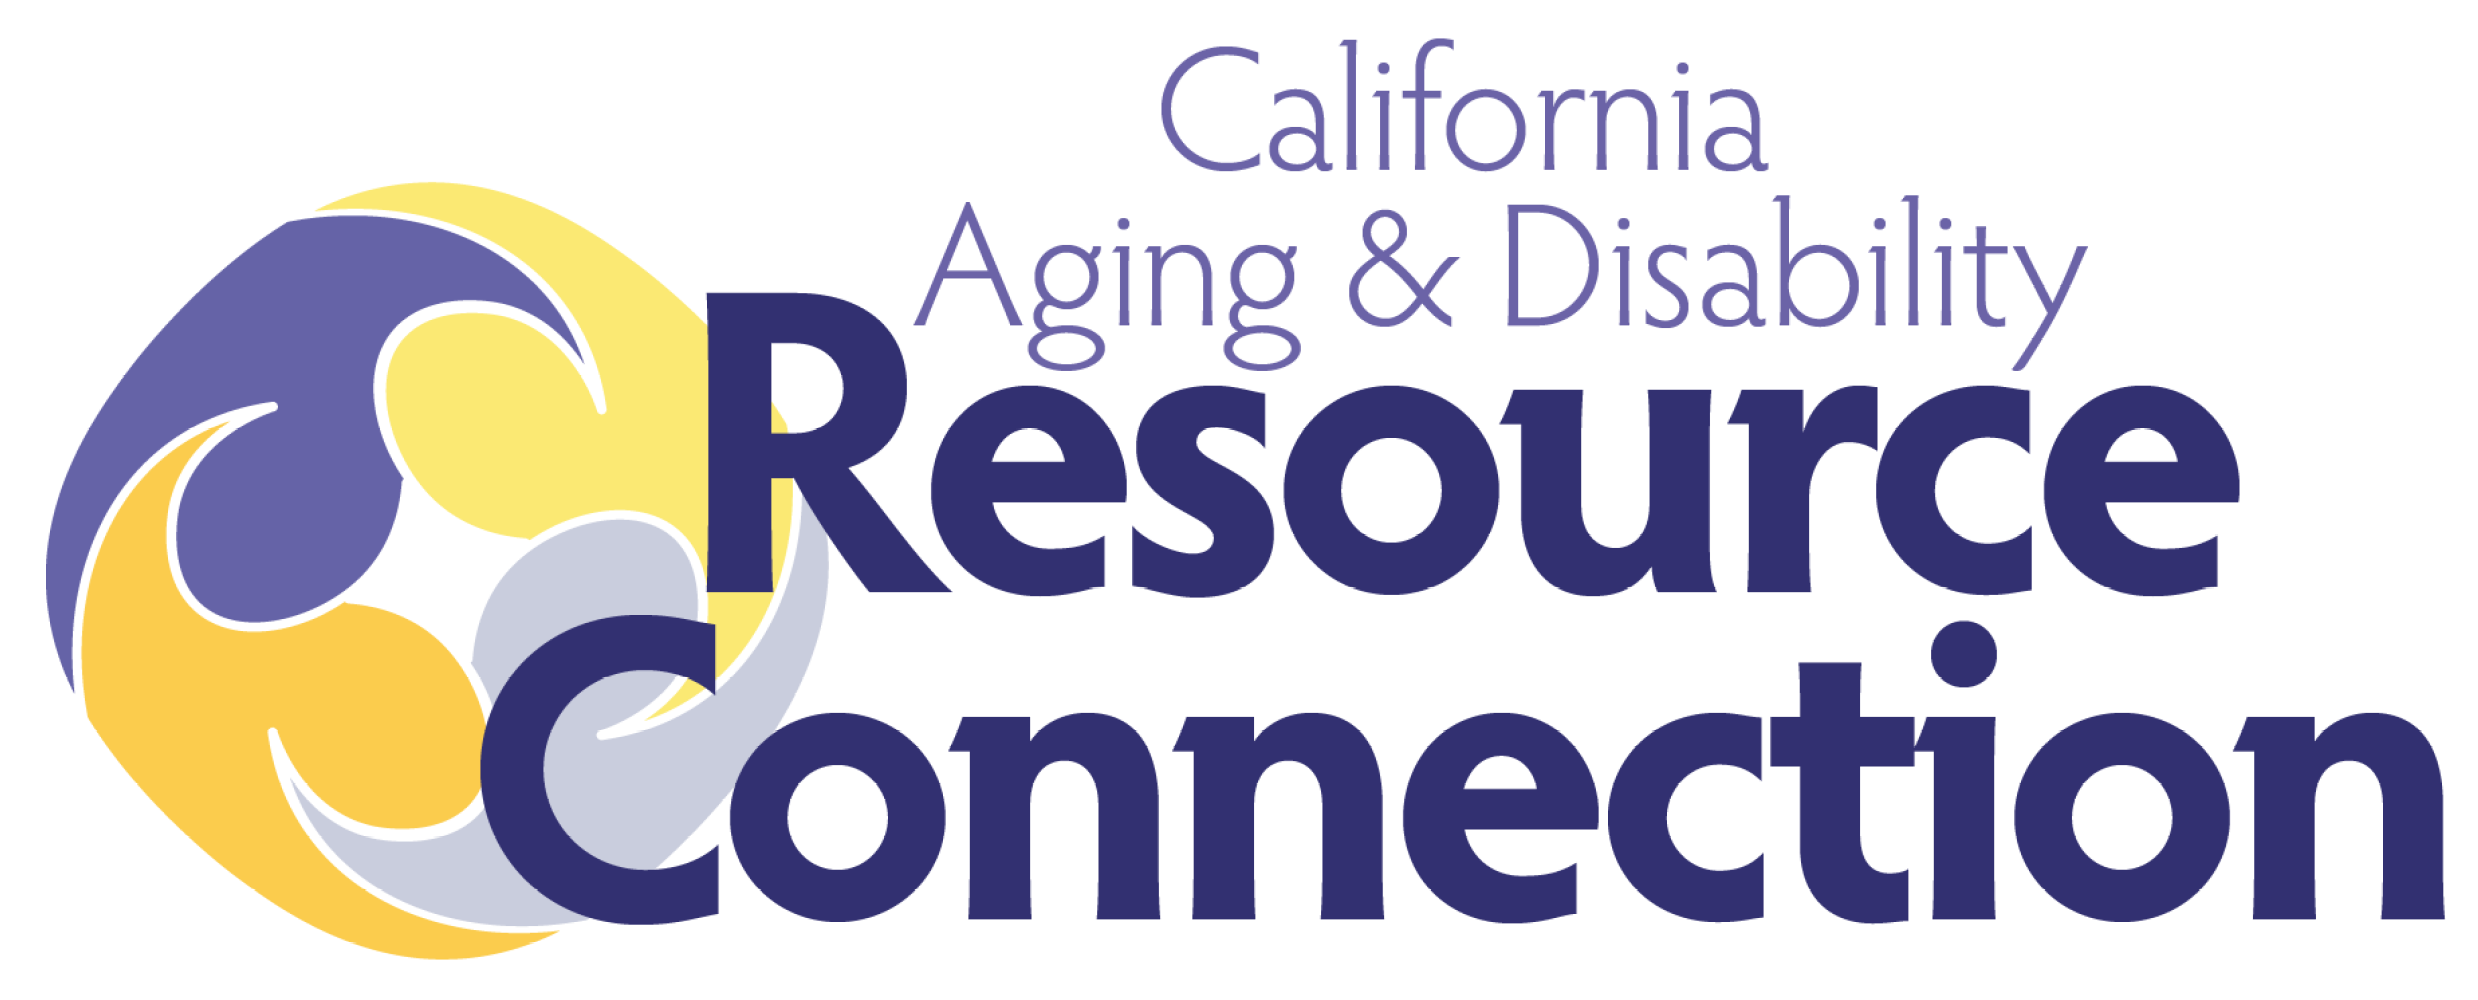 The Aging and Disability Resource Connection Logo